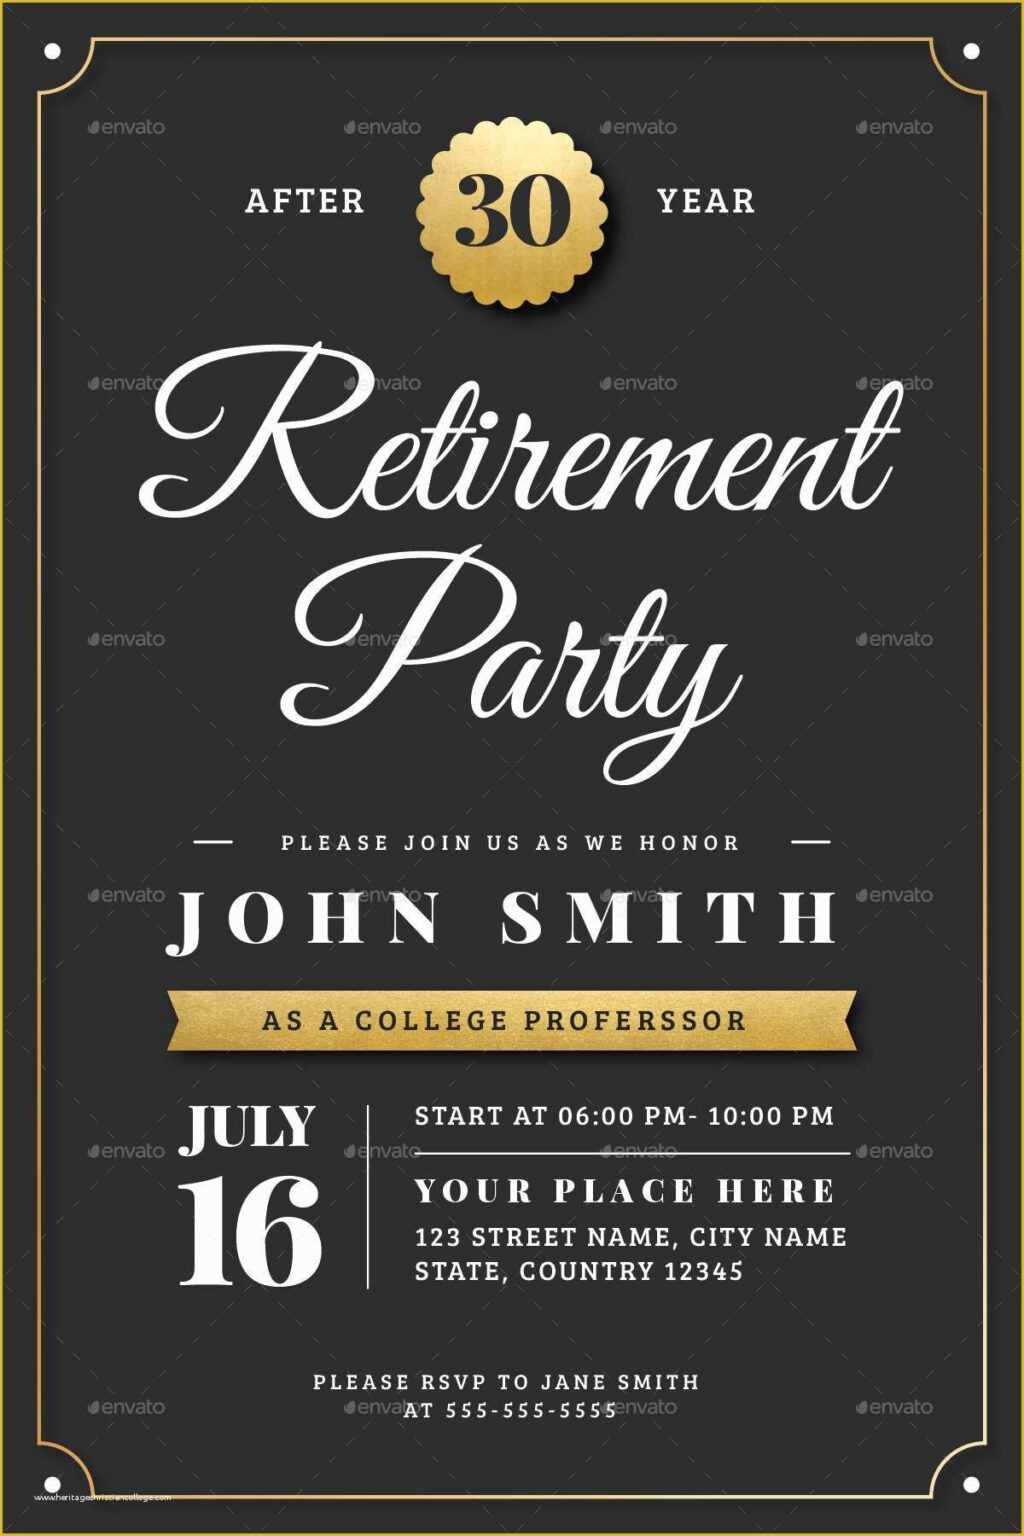 032-retirement-party-announcement-template-free-of-gold-throughout